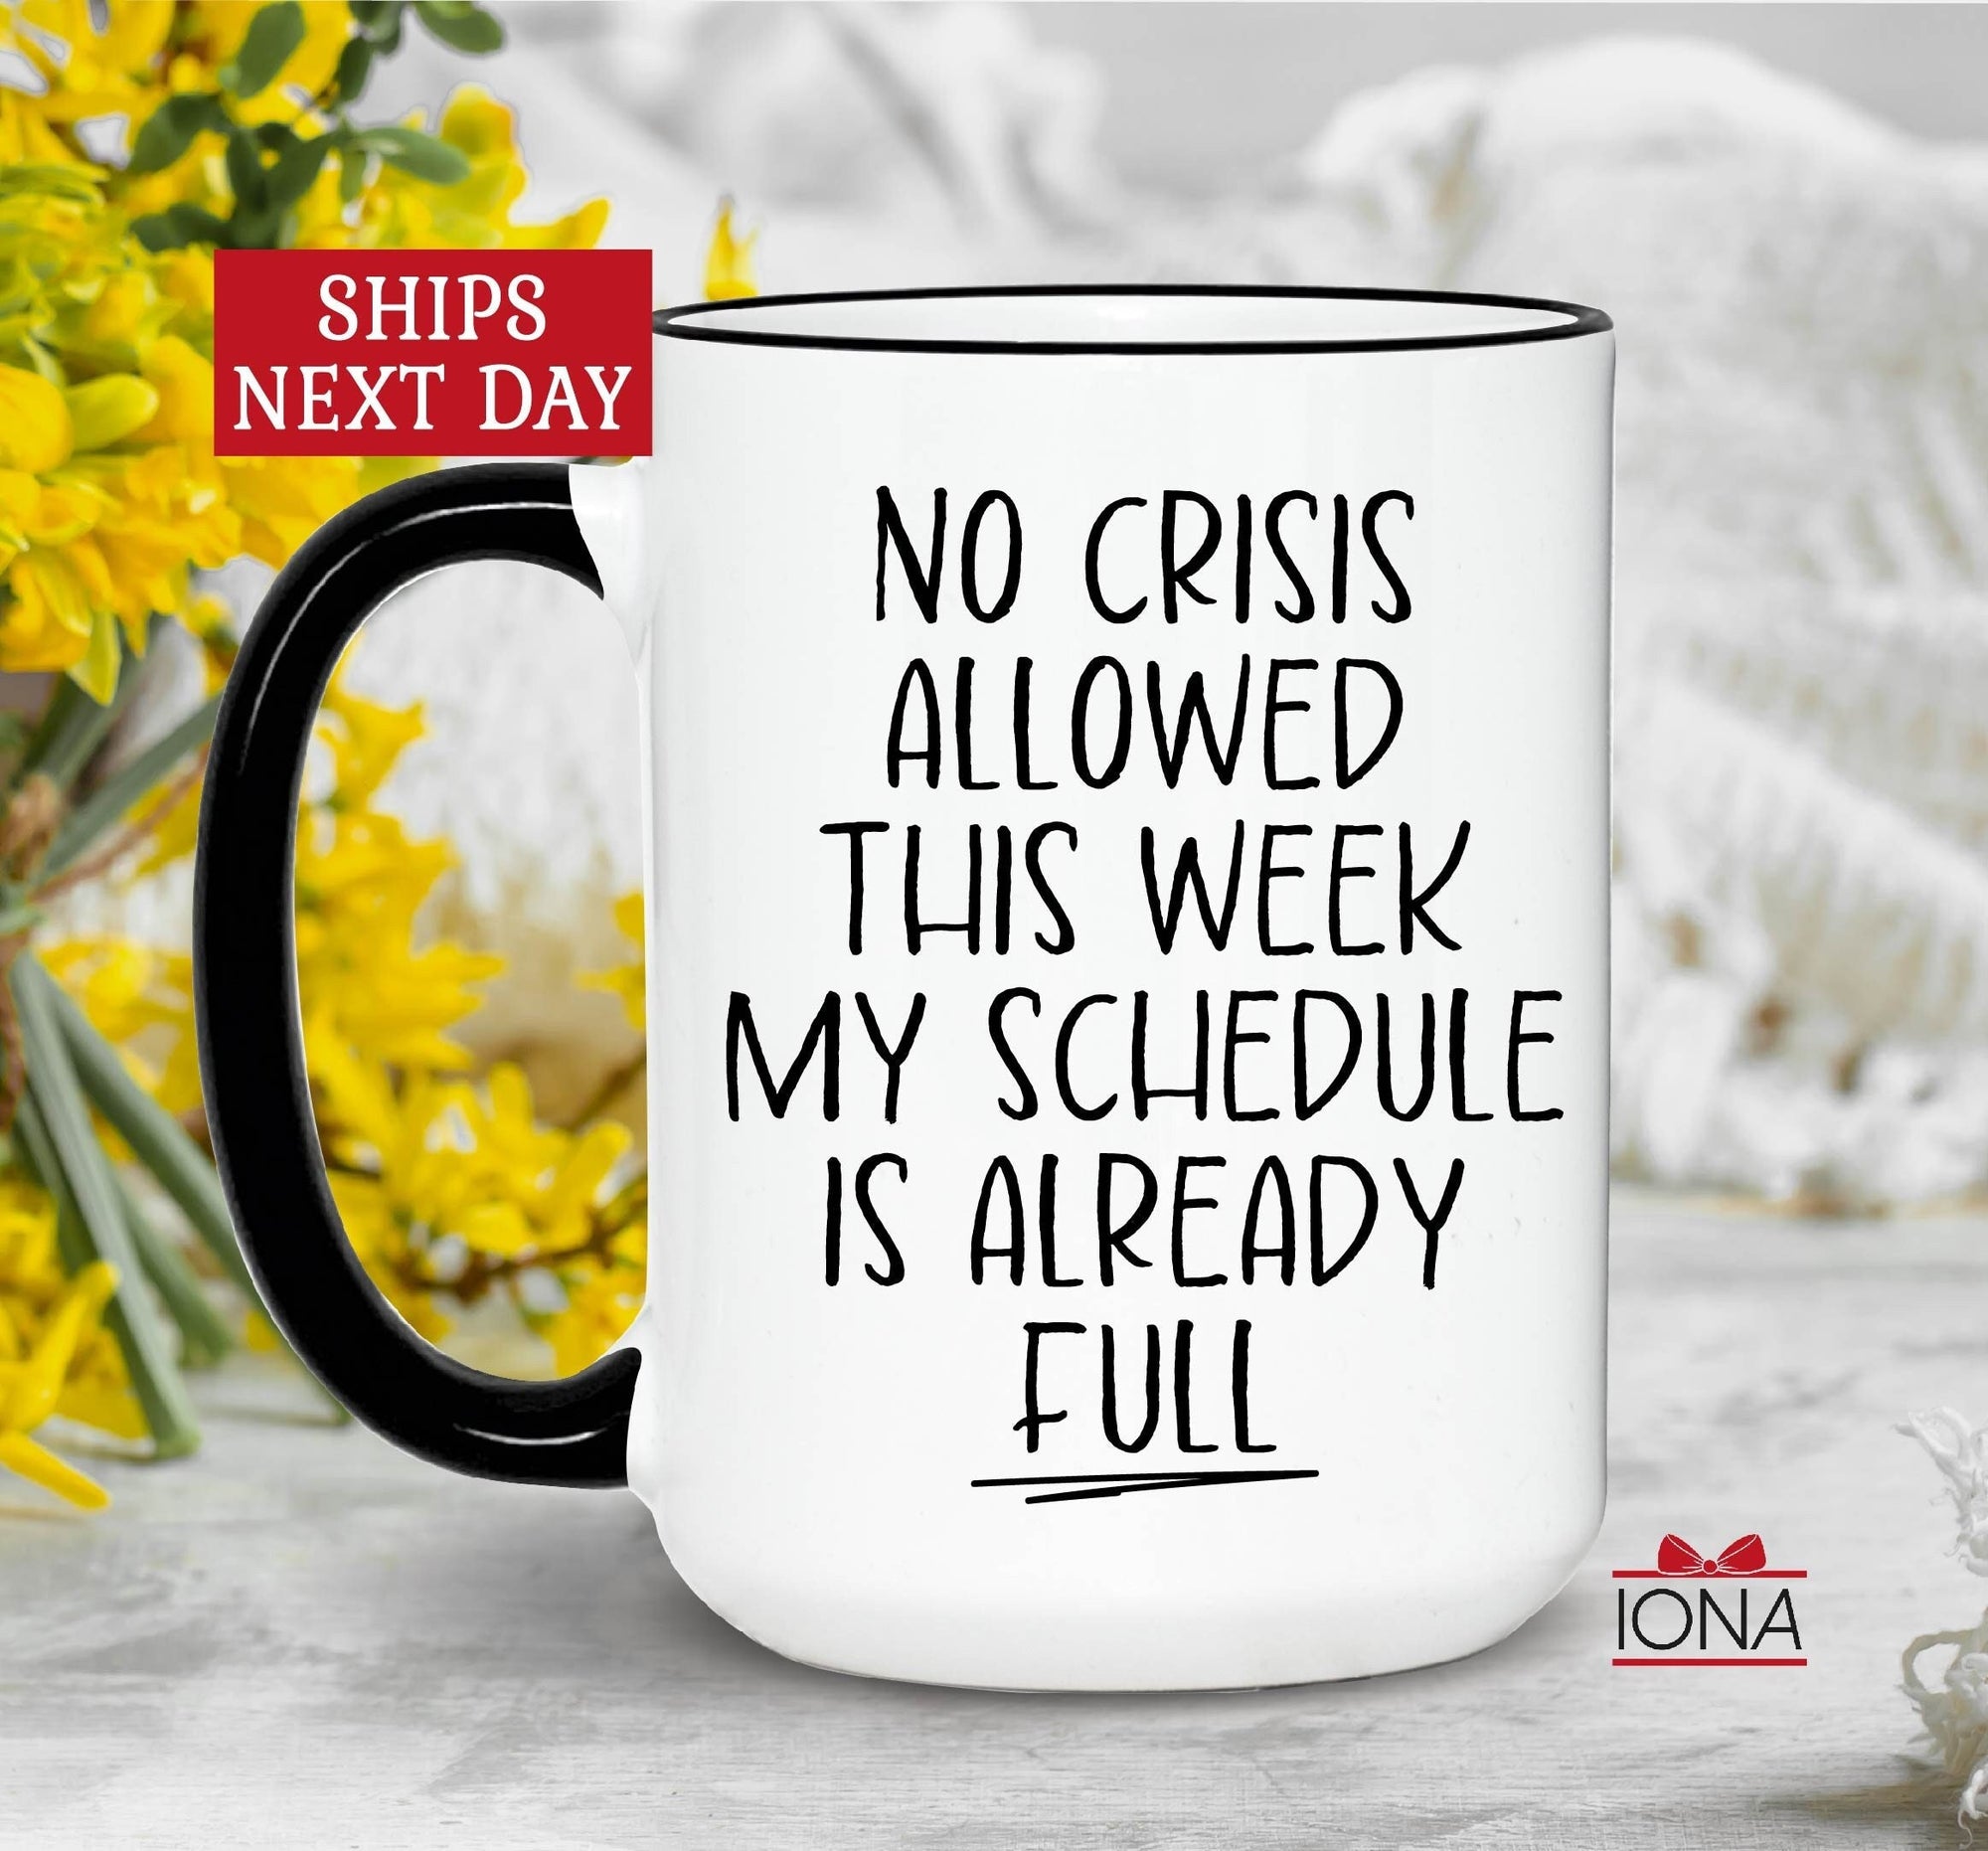 Funny Coworker Gift, No Crisis Allowed, Funny Work bestie Gift, Office Coffee Mug, Christmas Coworker, Funny Boss Gift, Funny Email Mug